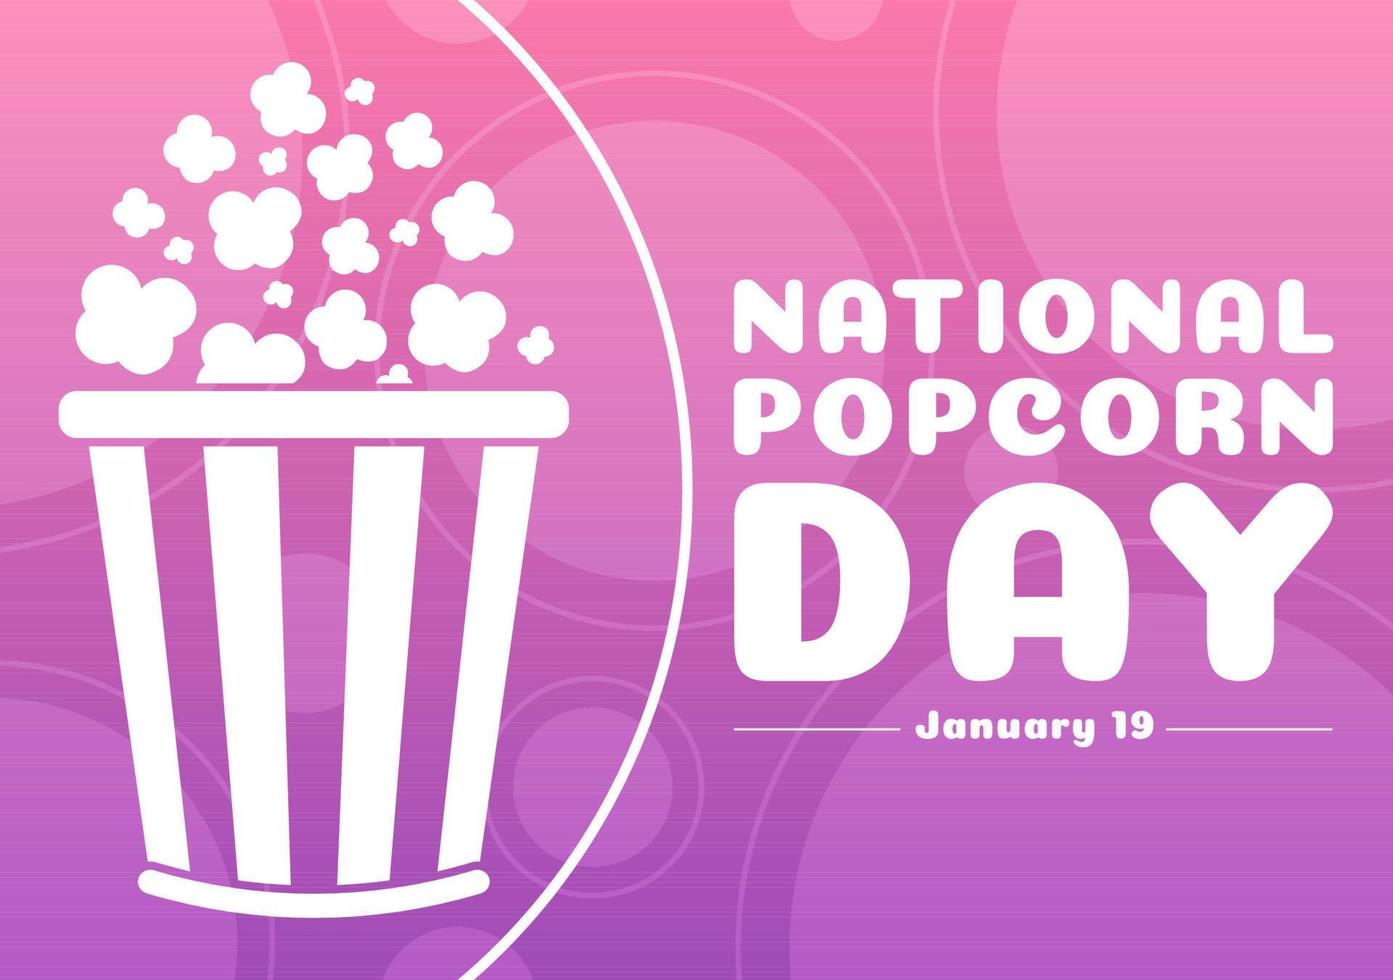 National Popcorn Day on January 19th with a Big Box of Red and White Stripe in Flat Cartoon Background Hand Drawn Templates Illustration vector